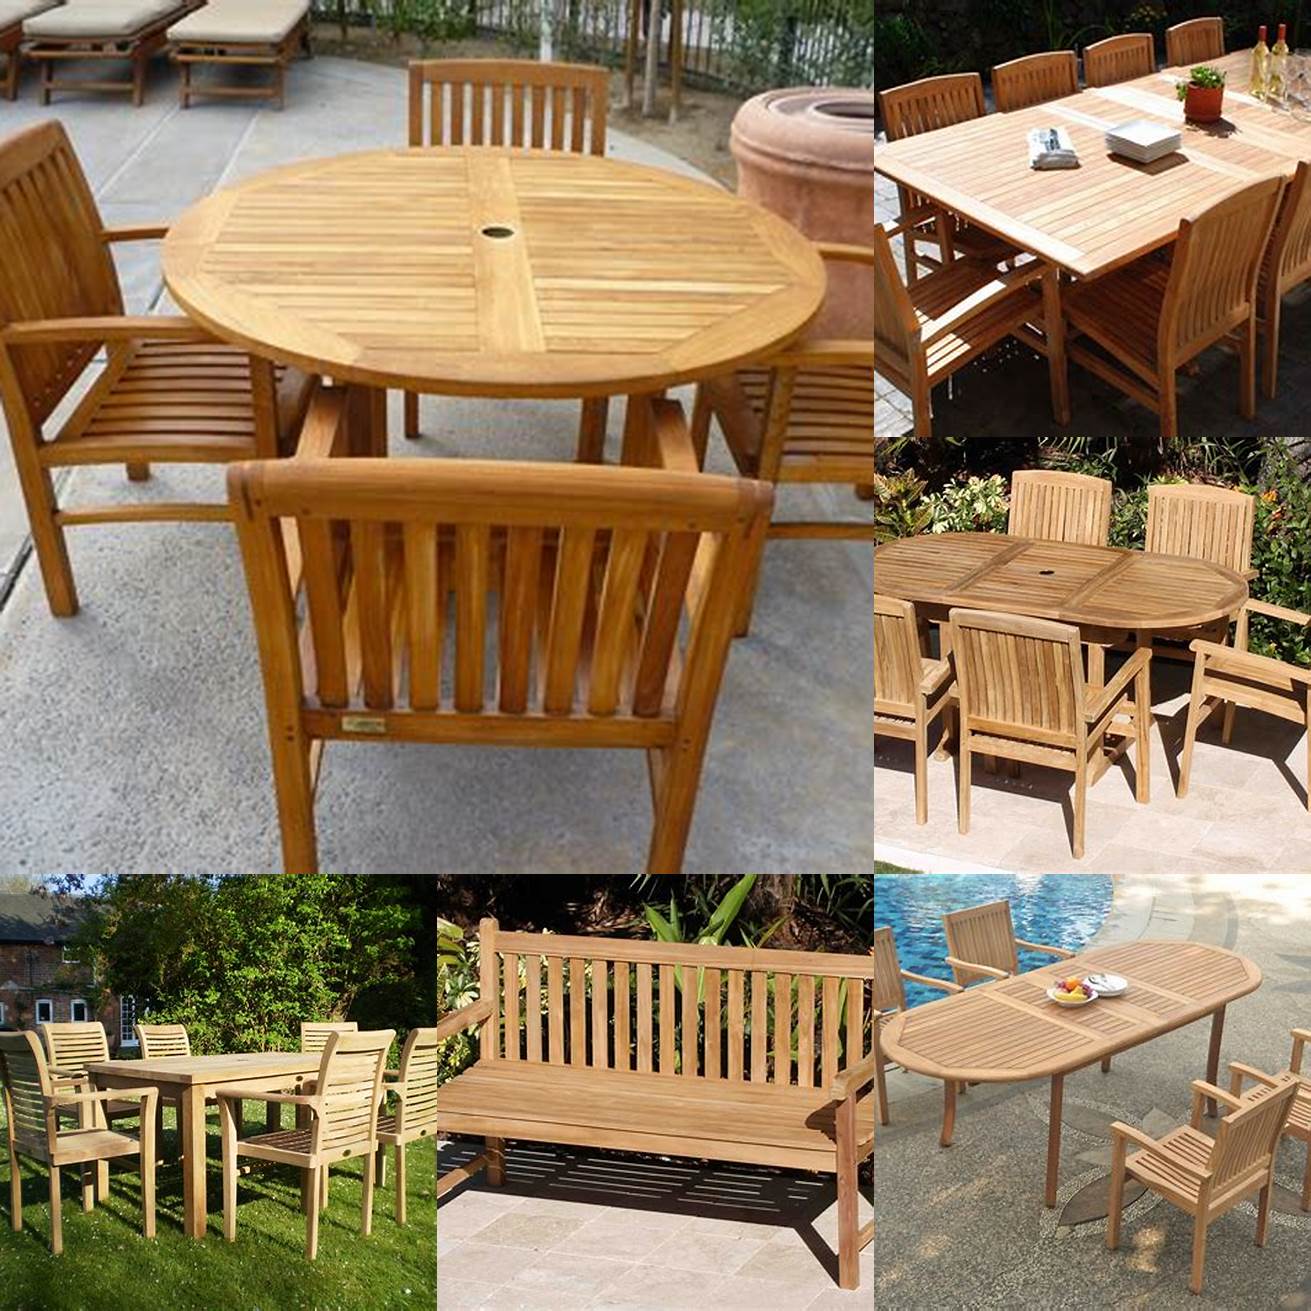 A picture of plantation teak furniture being used in a garden